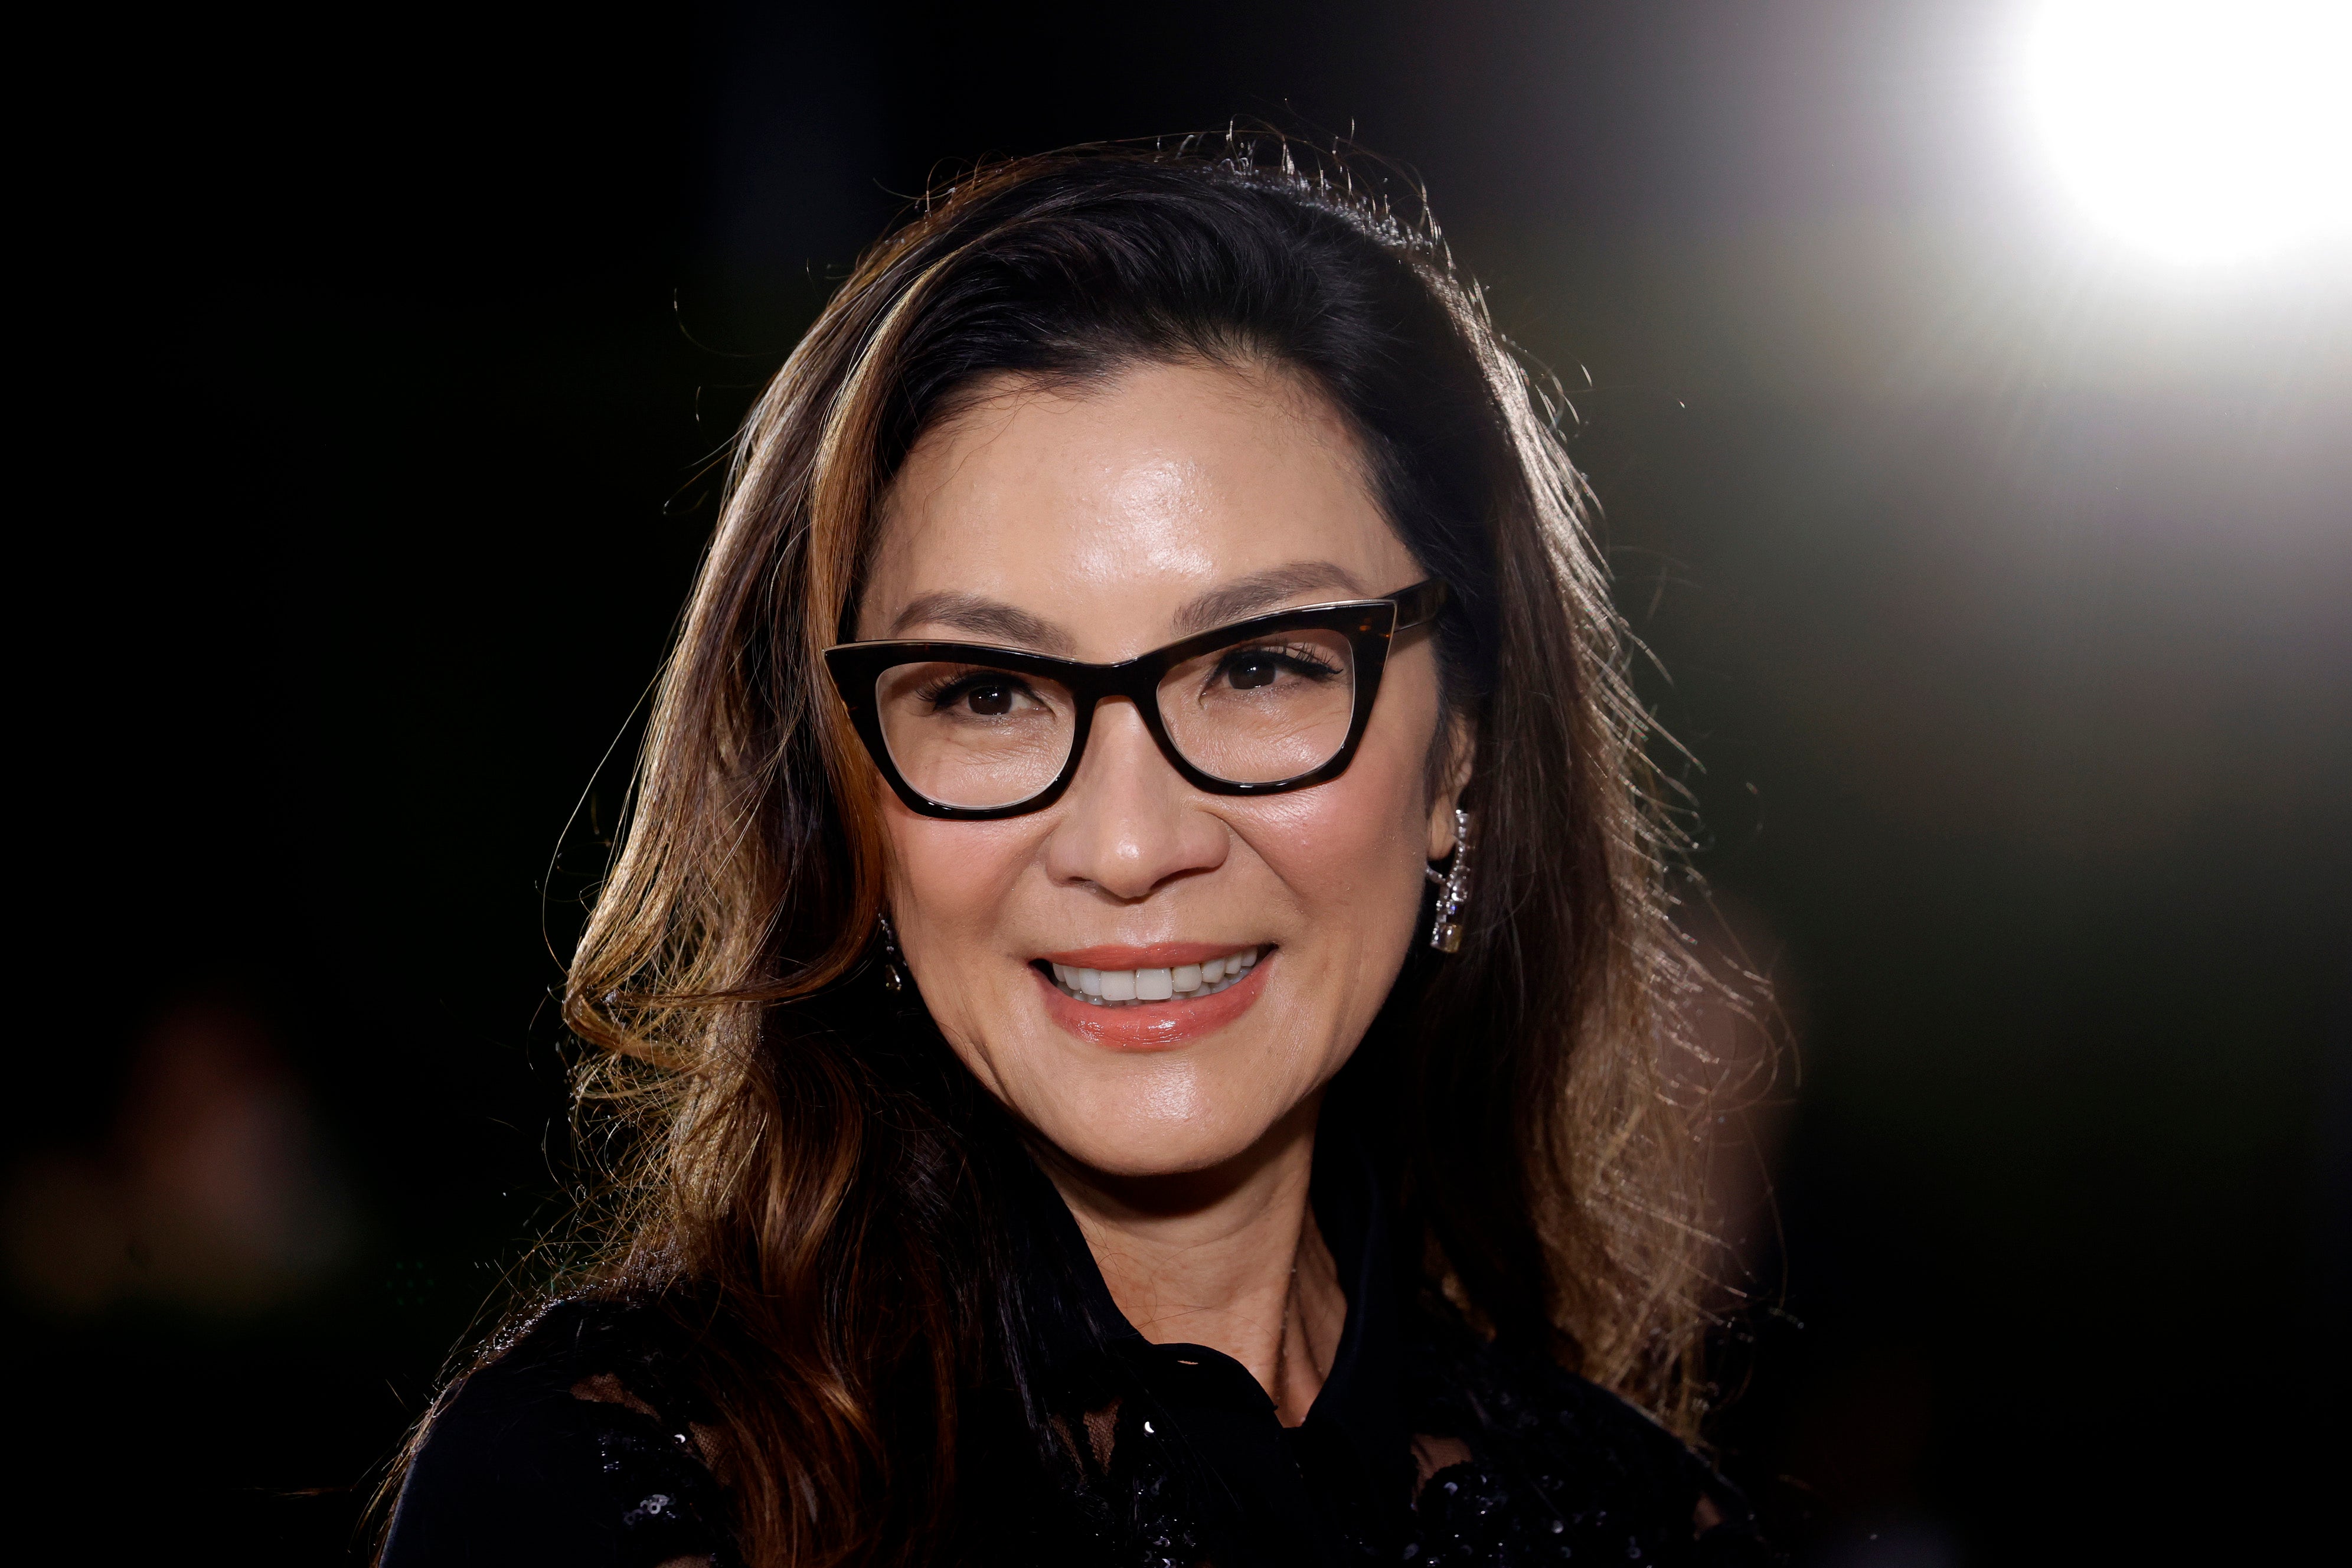 Michelle Yeoh attends the 2nd Annual Academy Museum Gala at Academy Museum of Motion Pictures on October 15, 2022 in Los Angeles, California. (Photo: Frazer Harrison, Getty Images)